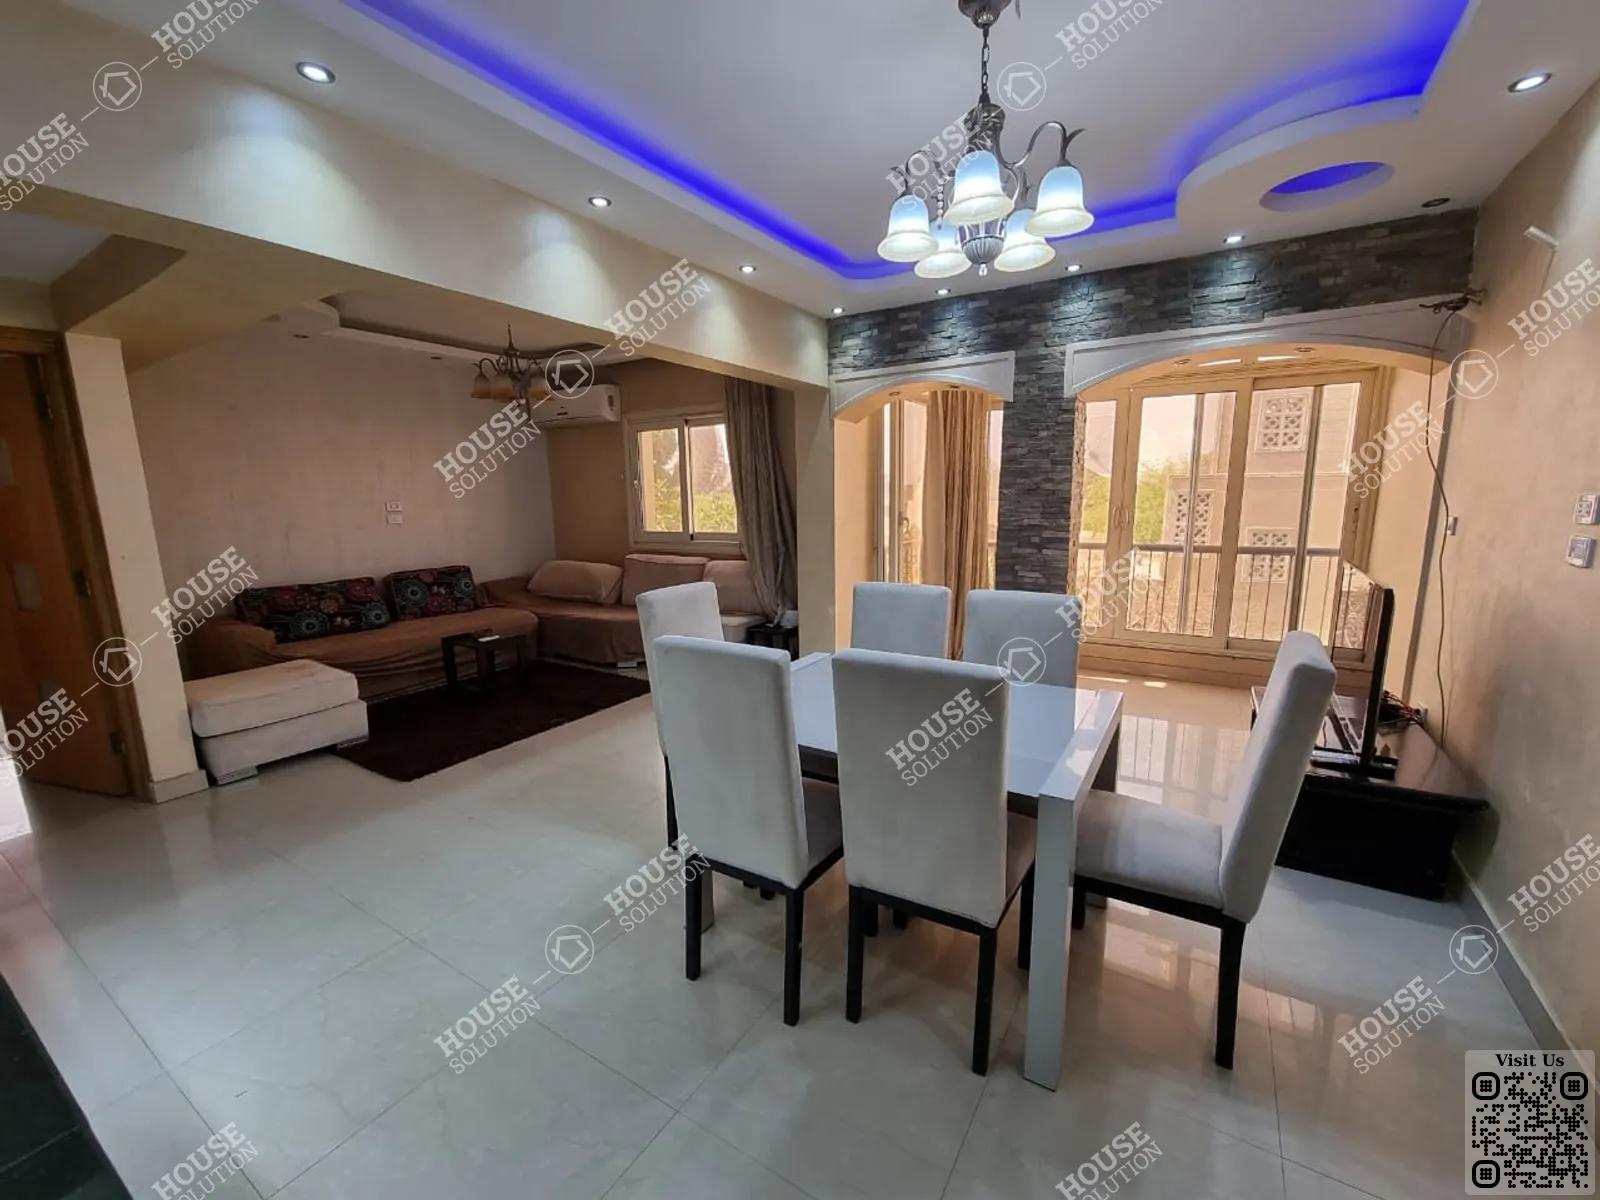 RECEPTION  @ Apartments For Rent In Maadi Maadi Degla Area: 100 m² consists of 2 Bedrooms 2 Bathrooms Modern furnished 4 stars #4506-0